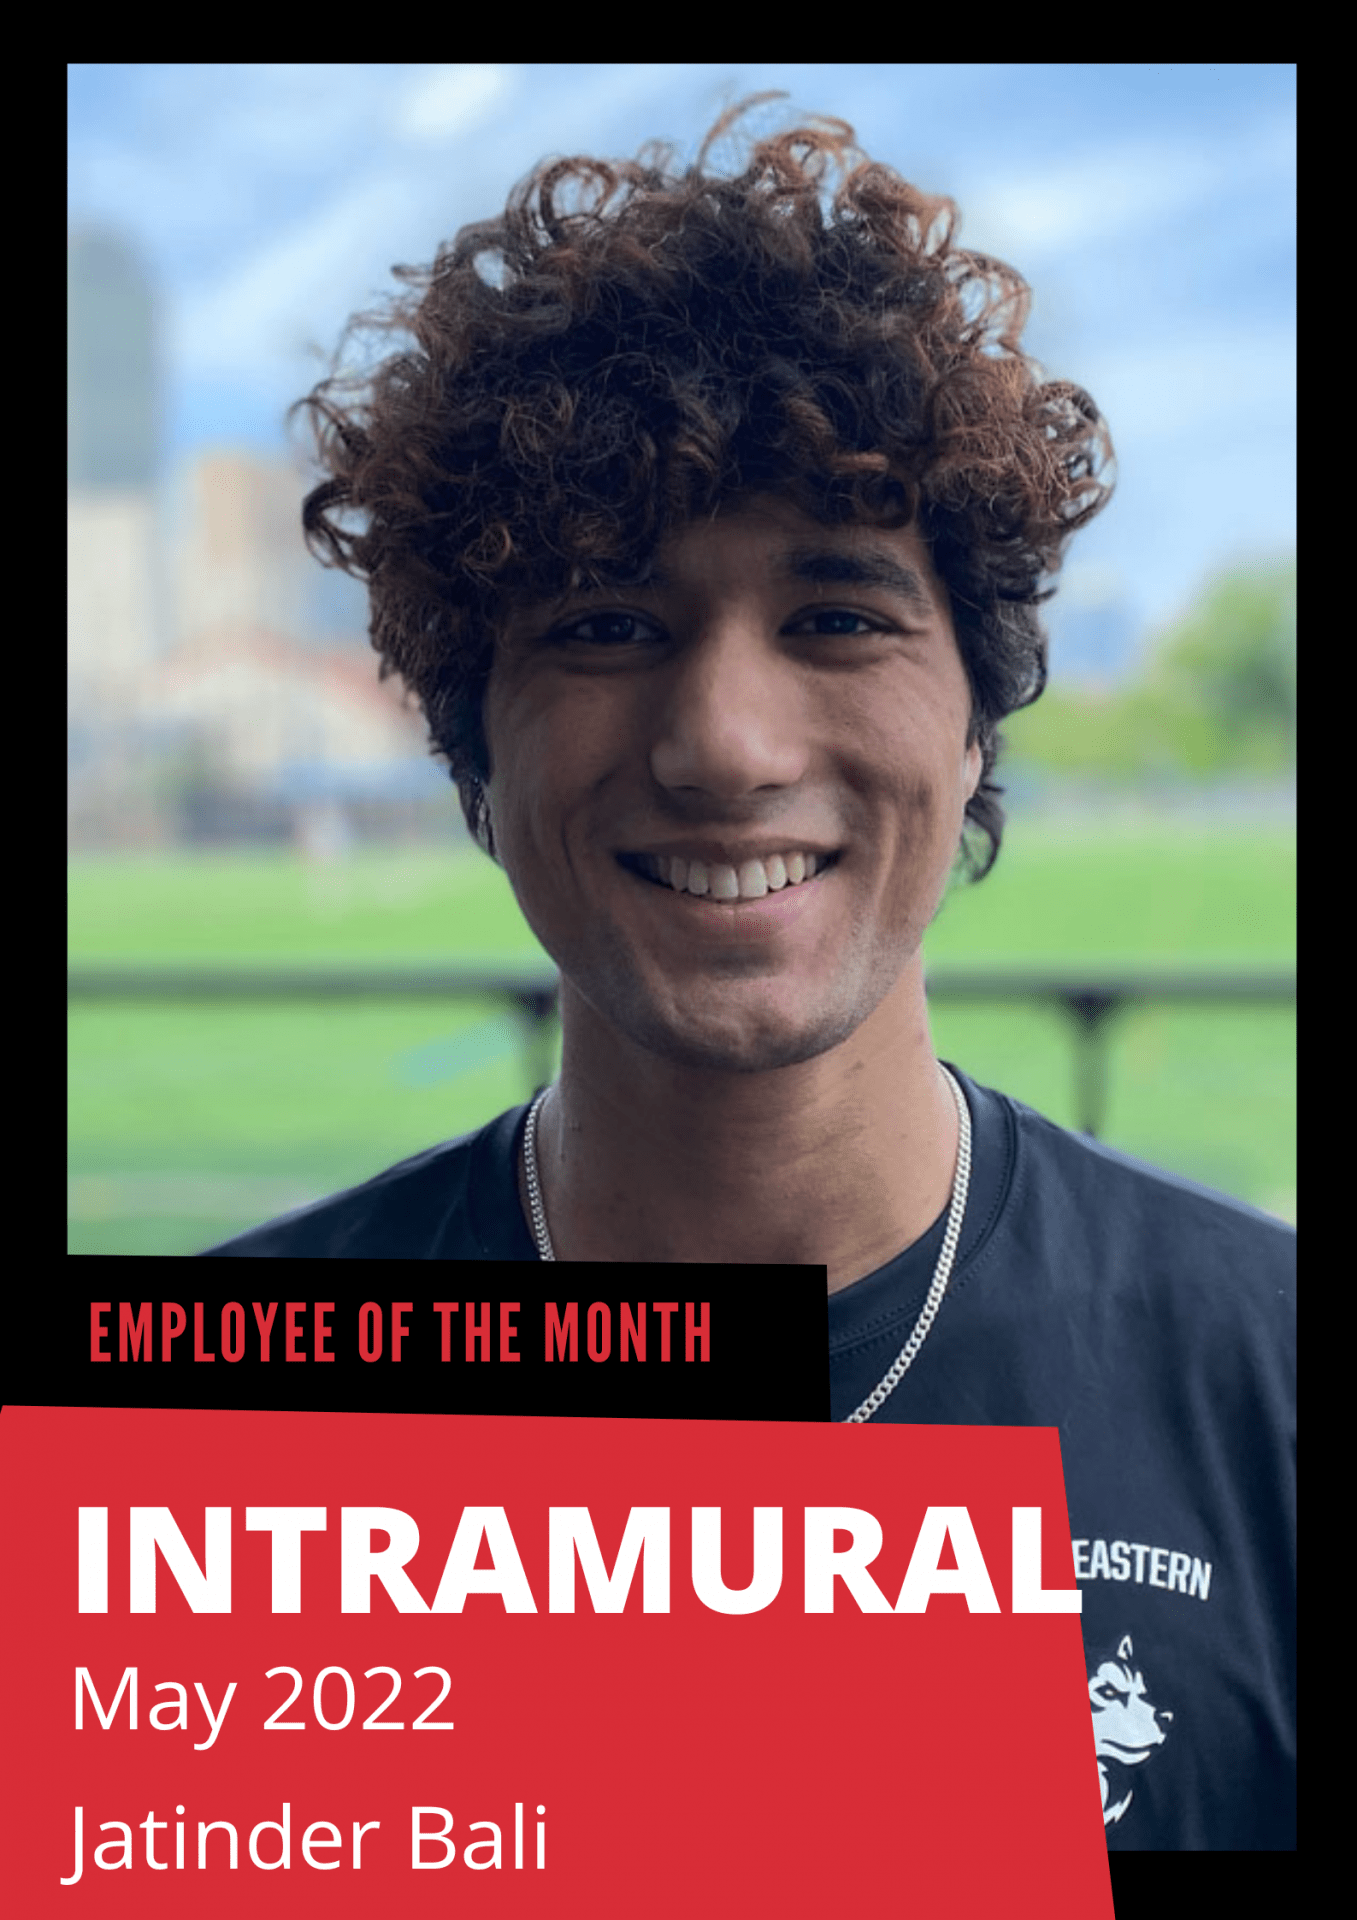 Employee of the Month, Intramural, May 2022, Jatinder Bali